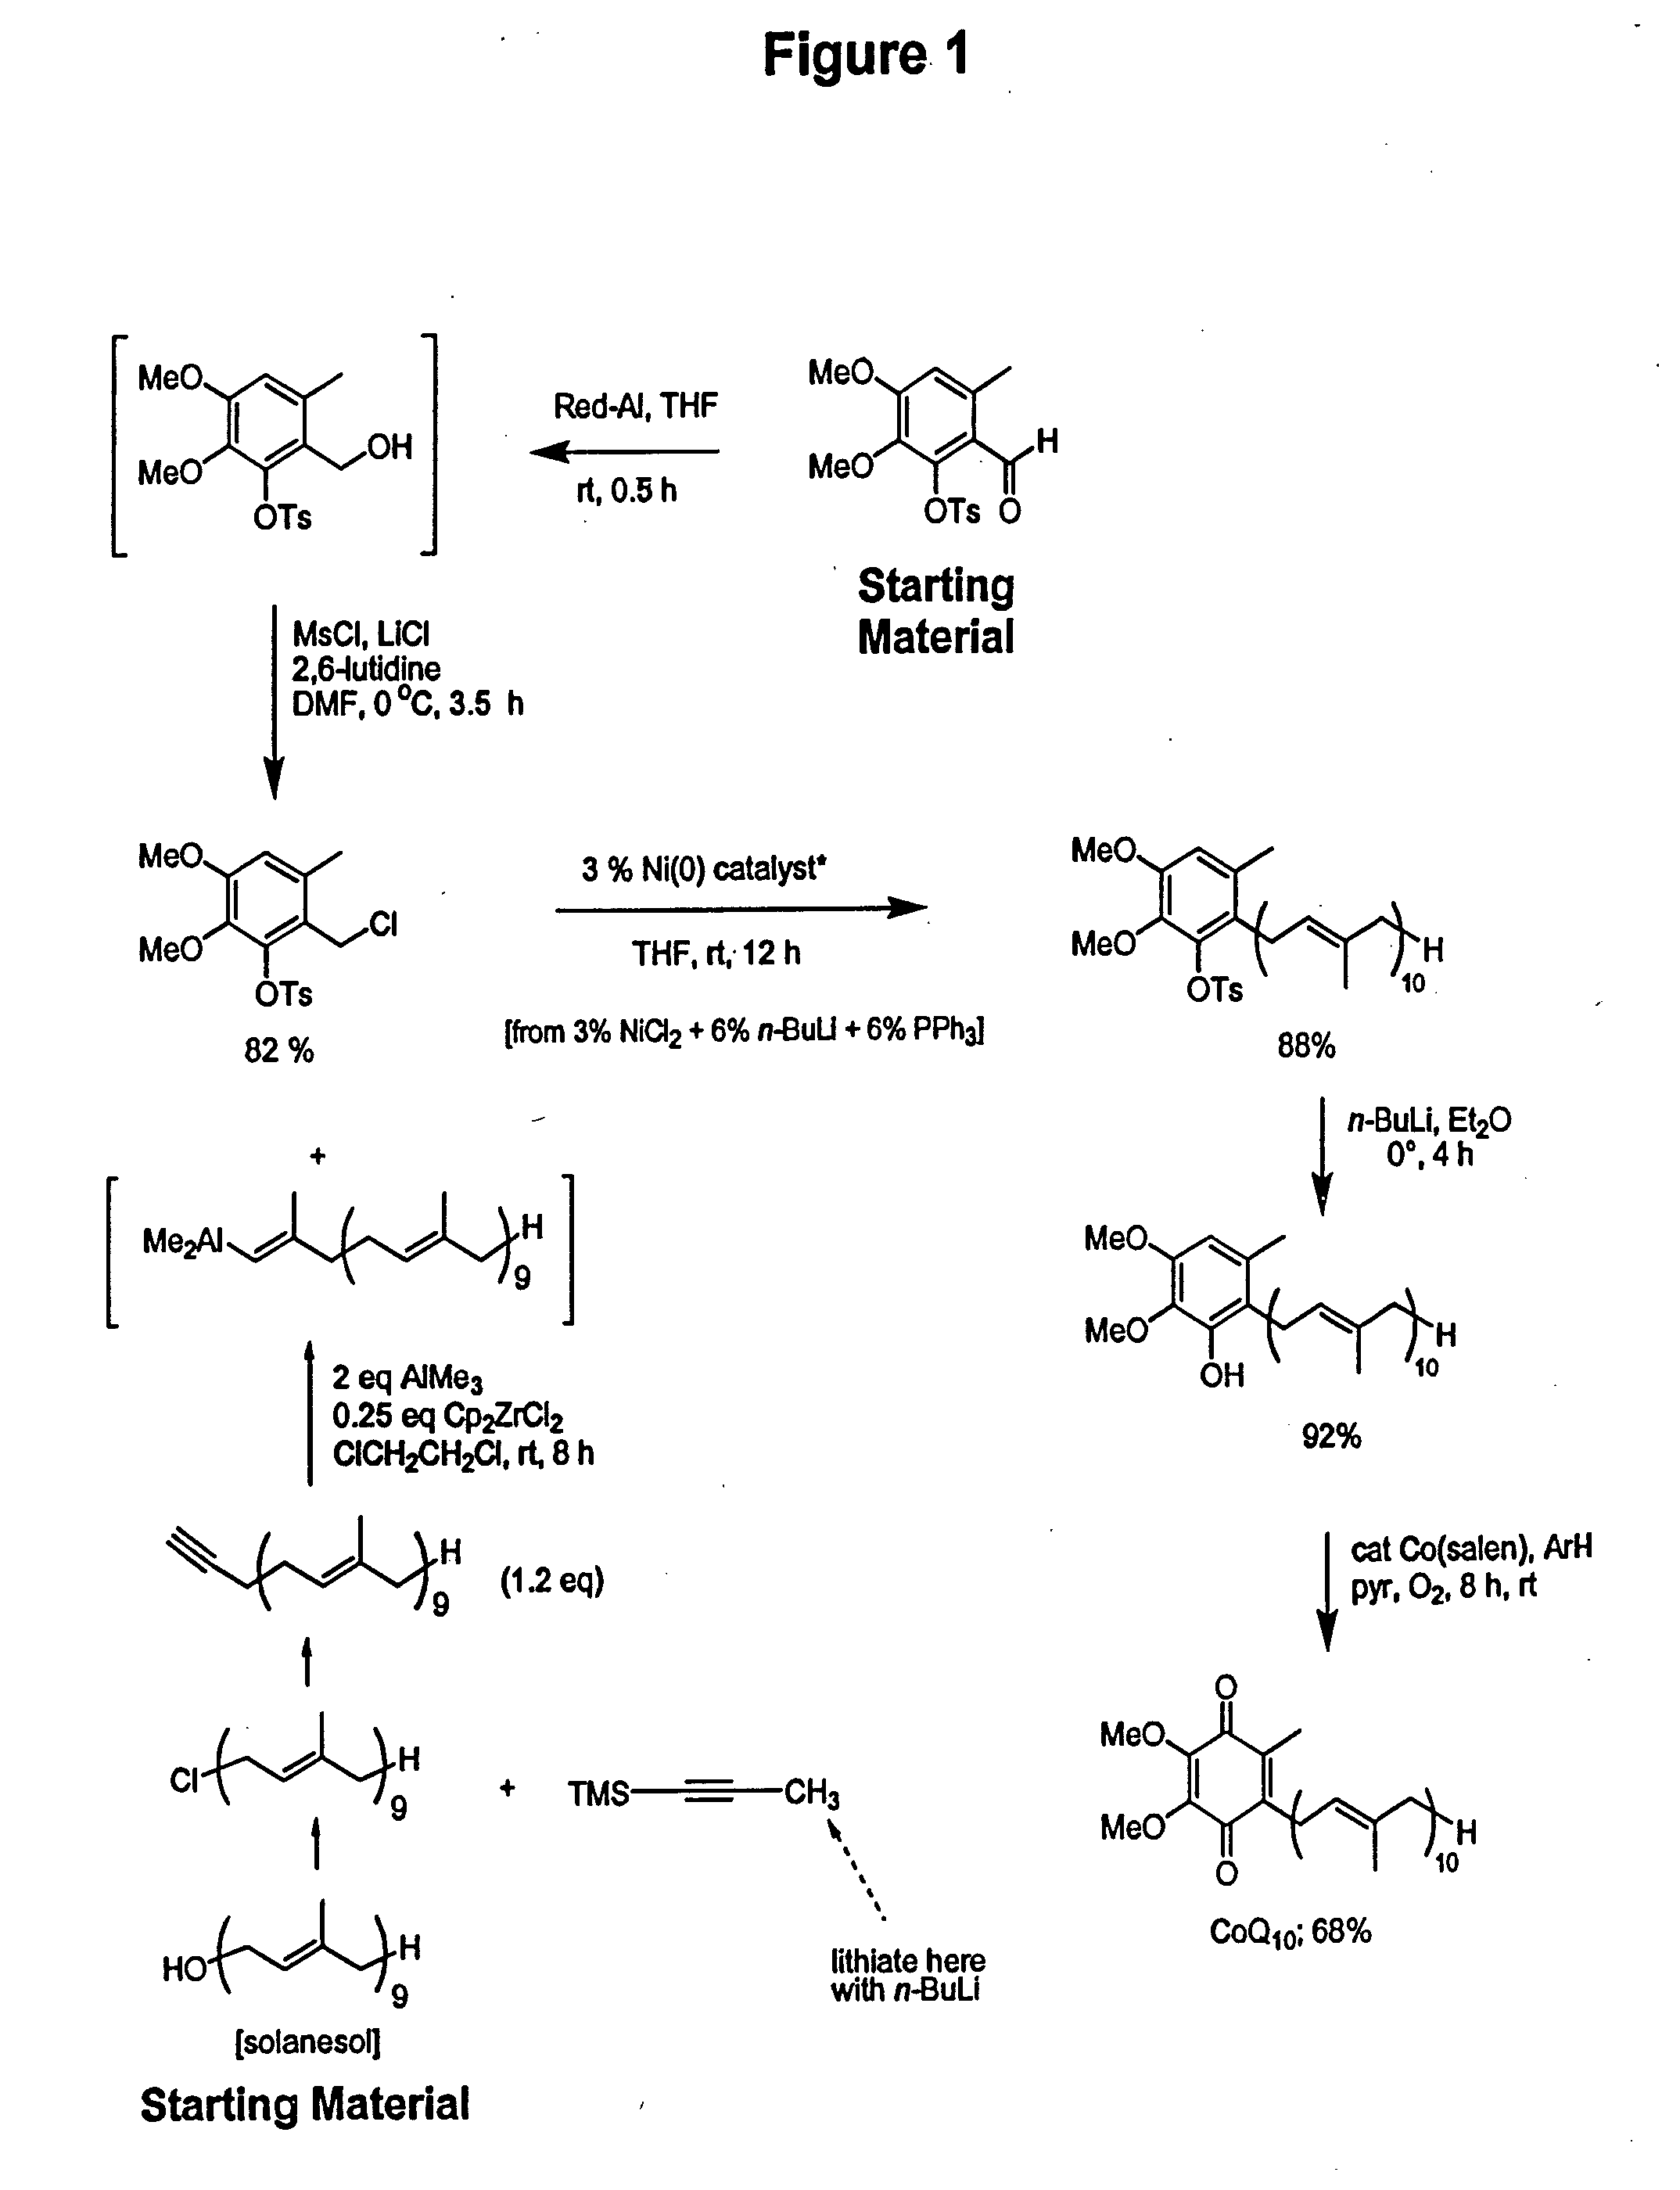 Practical, cost-effective synthesis of CoQ10